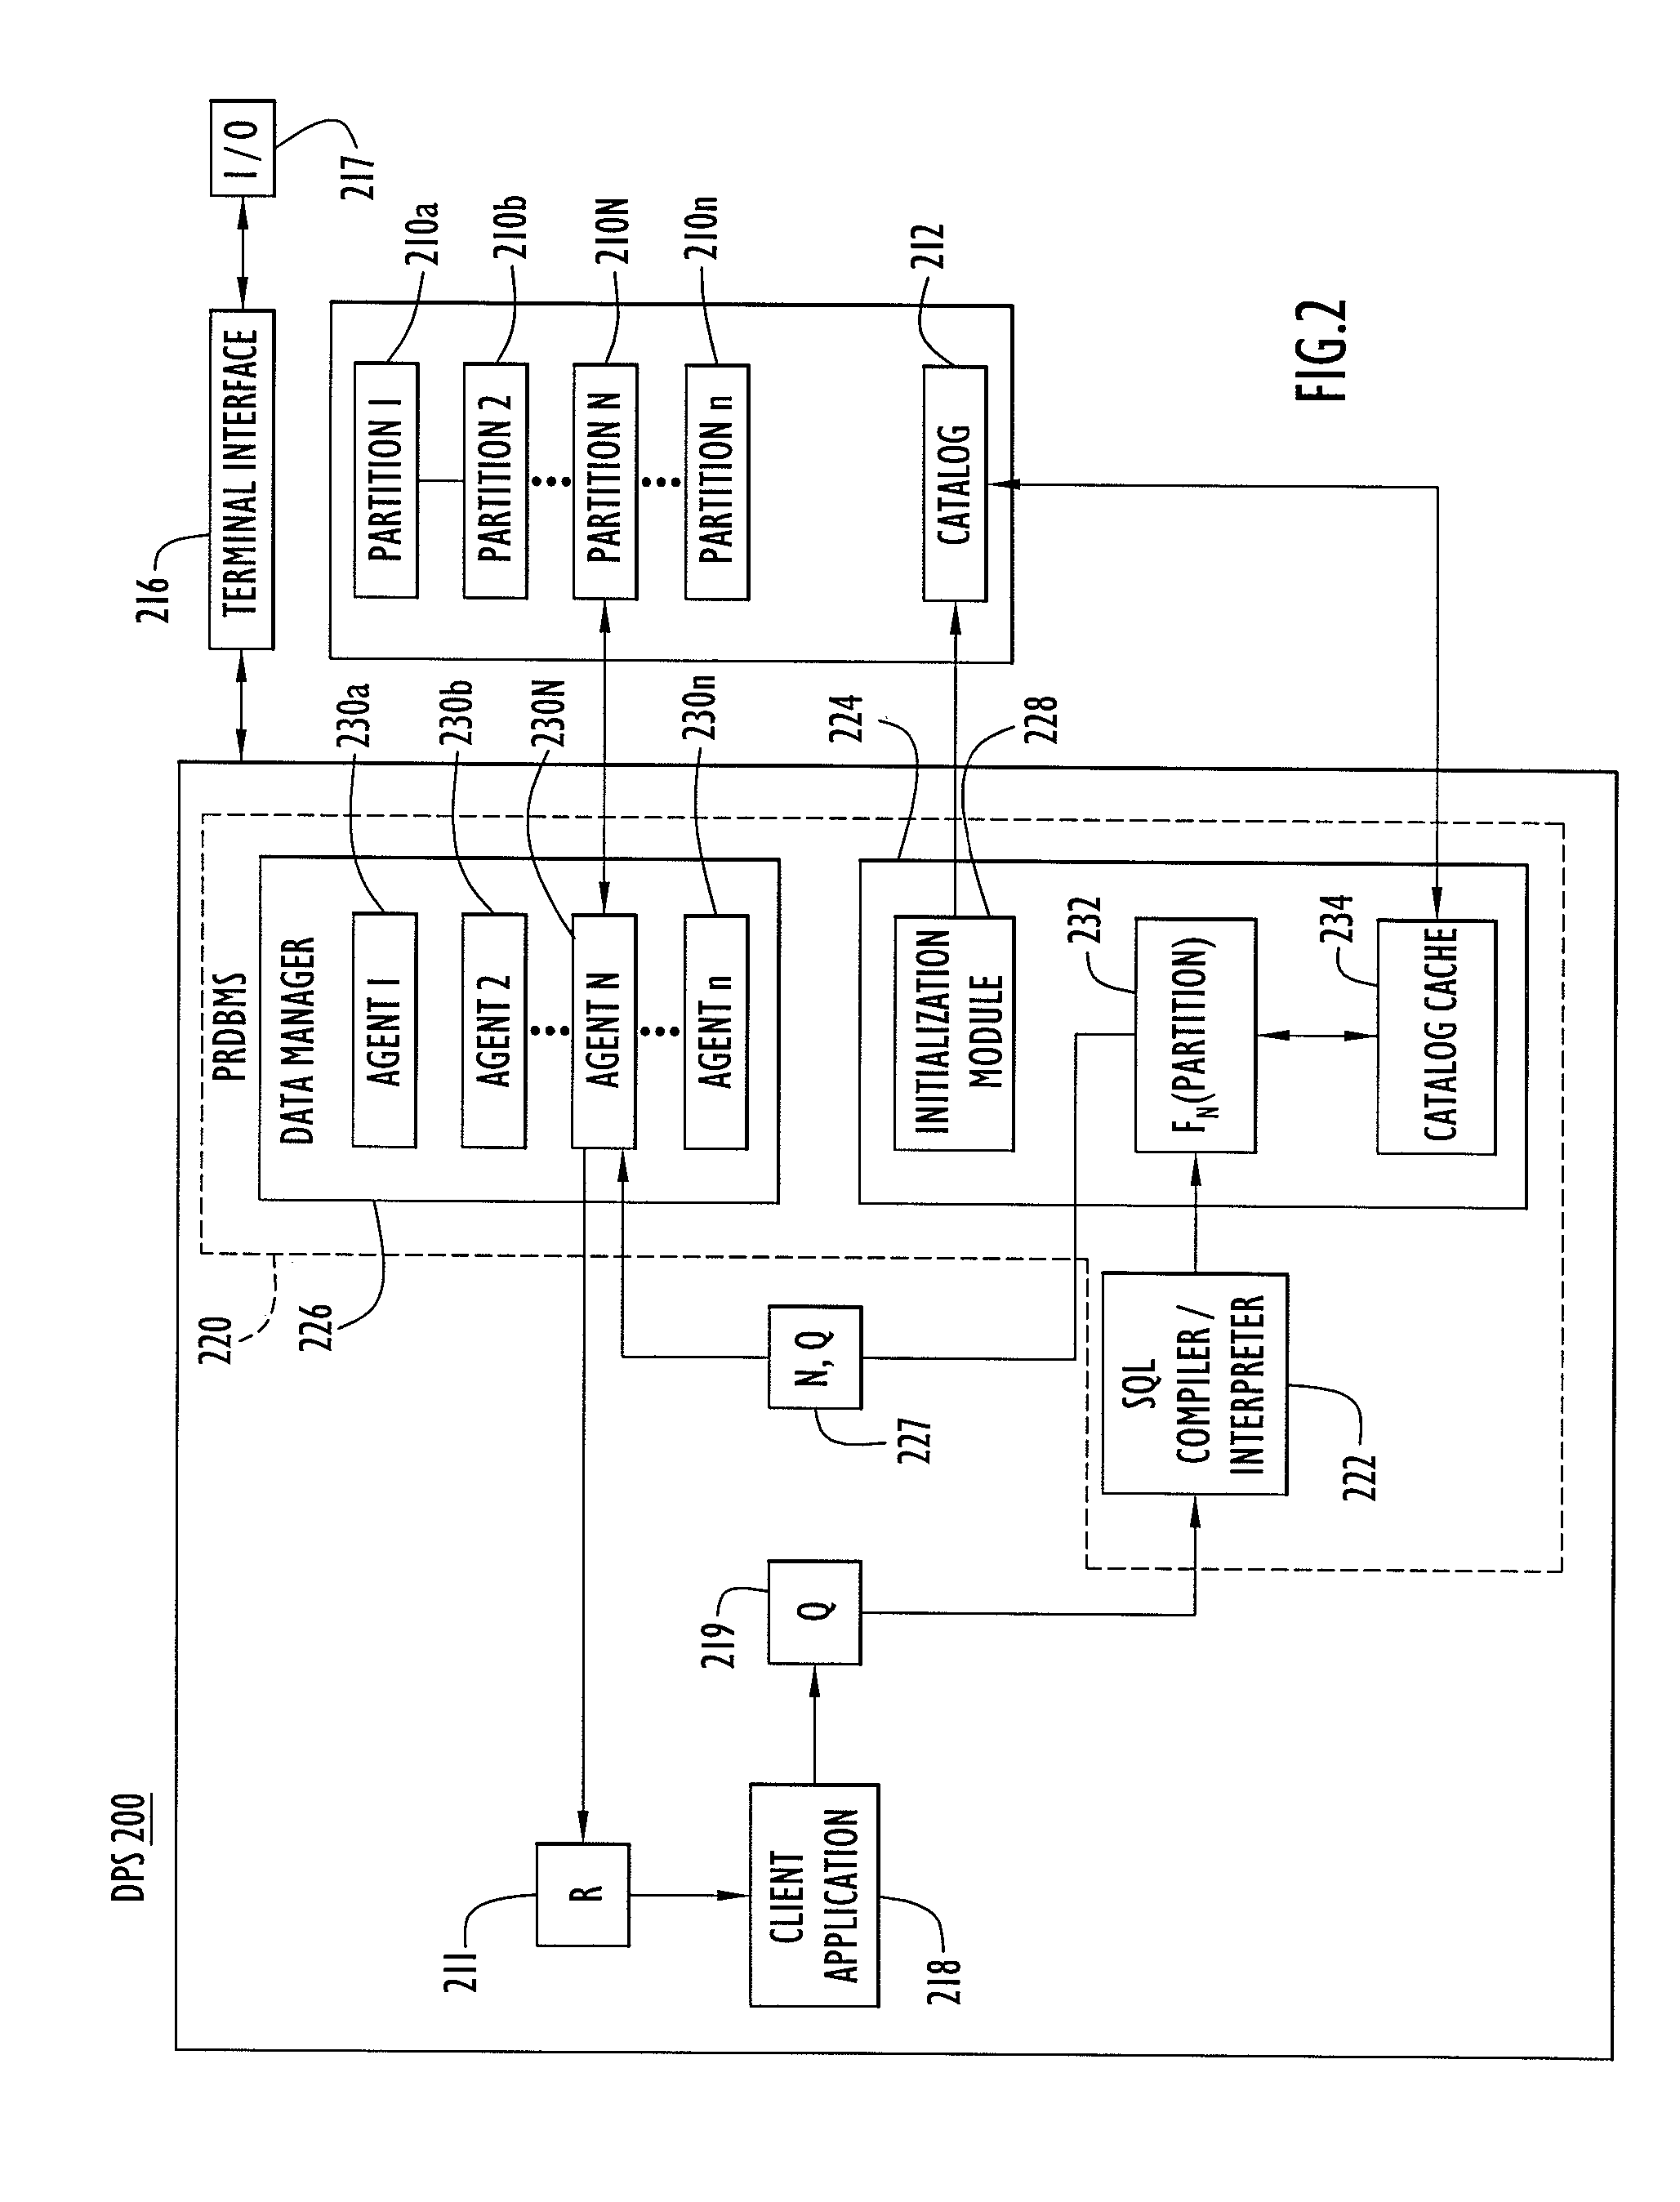 Method and System for Executing a Database Query